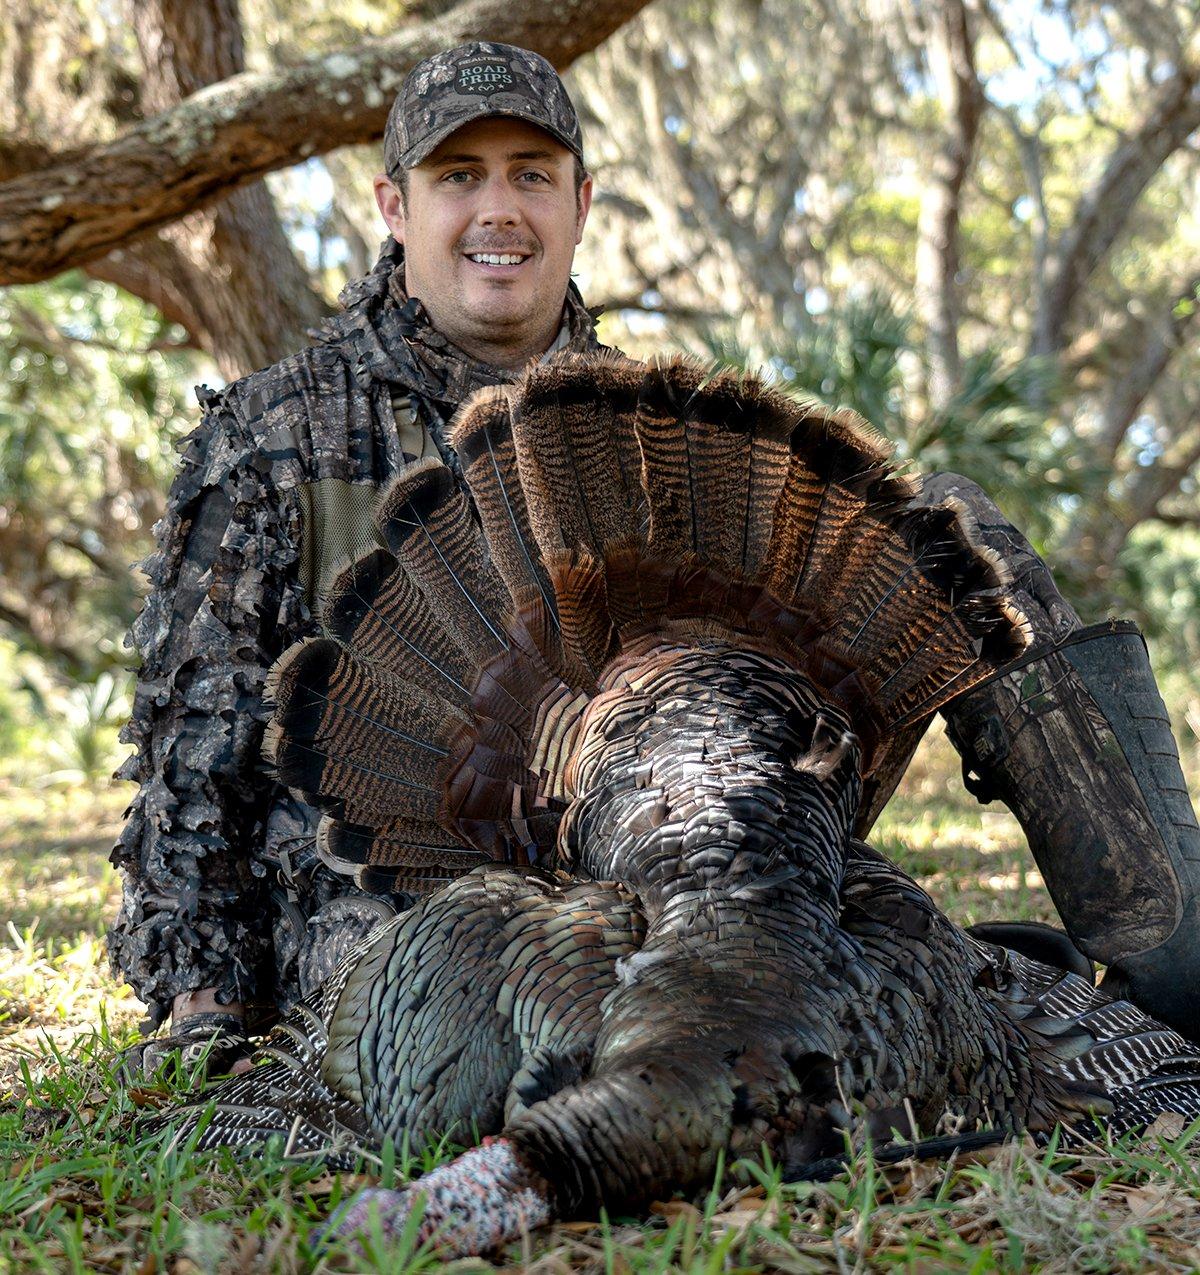 Florida remains a popular and productive turkey hunting destination. Photo by Realtree